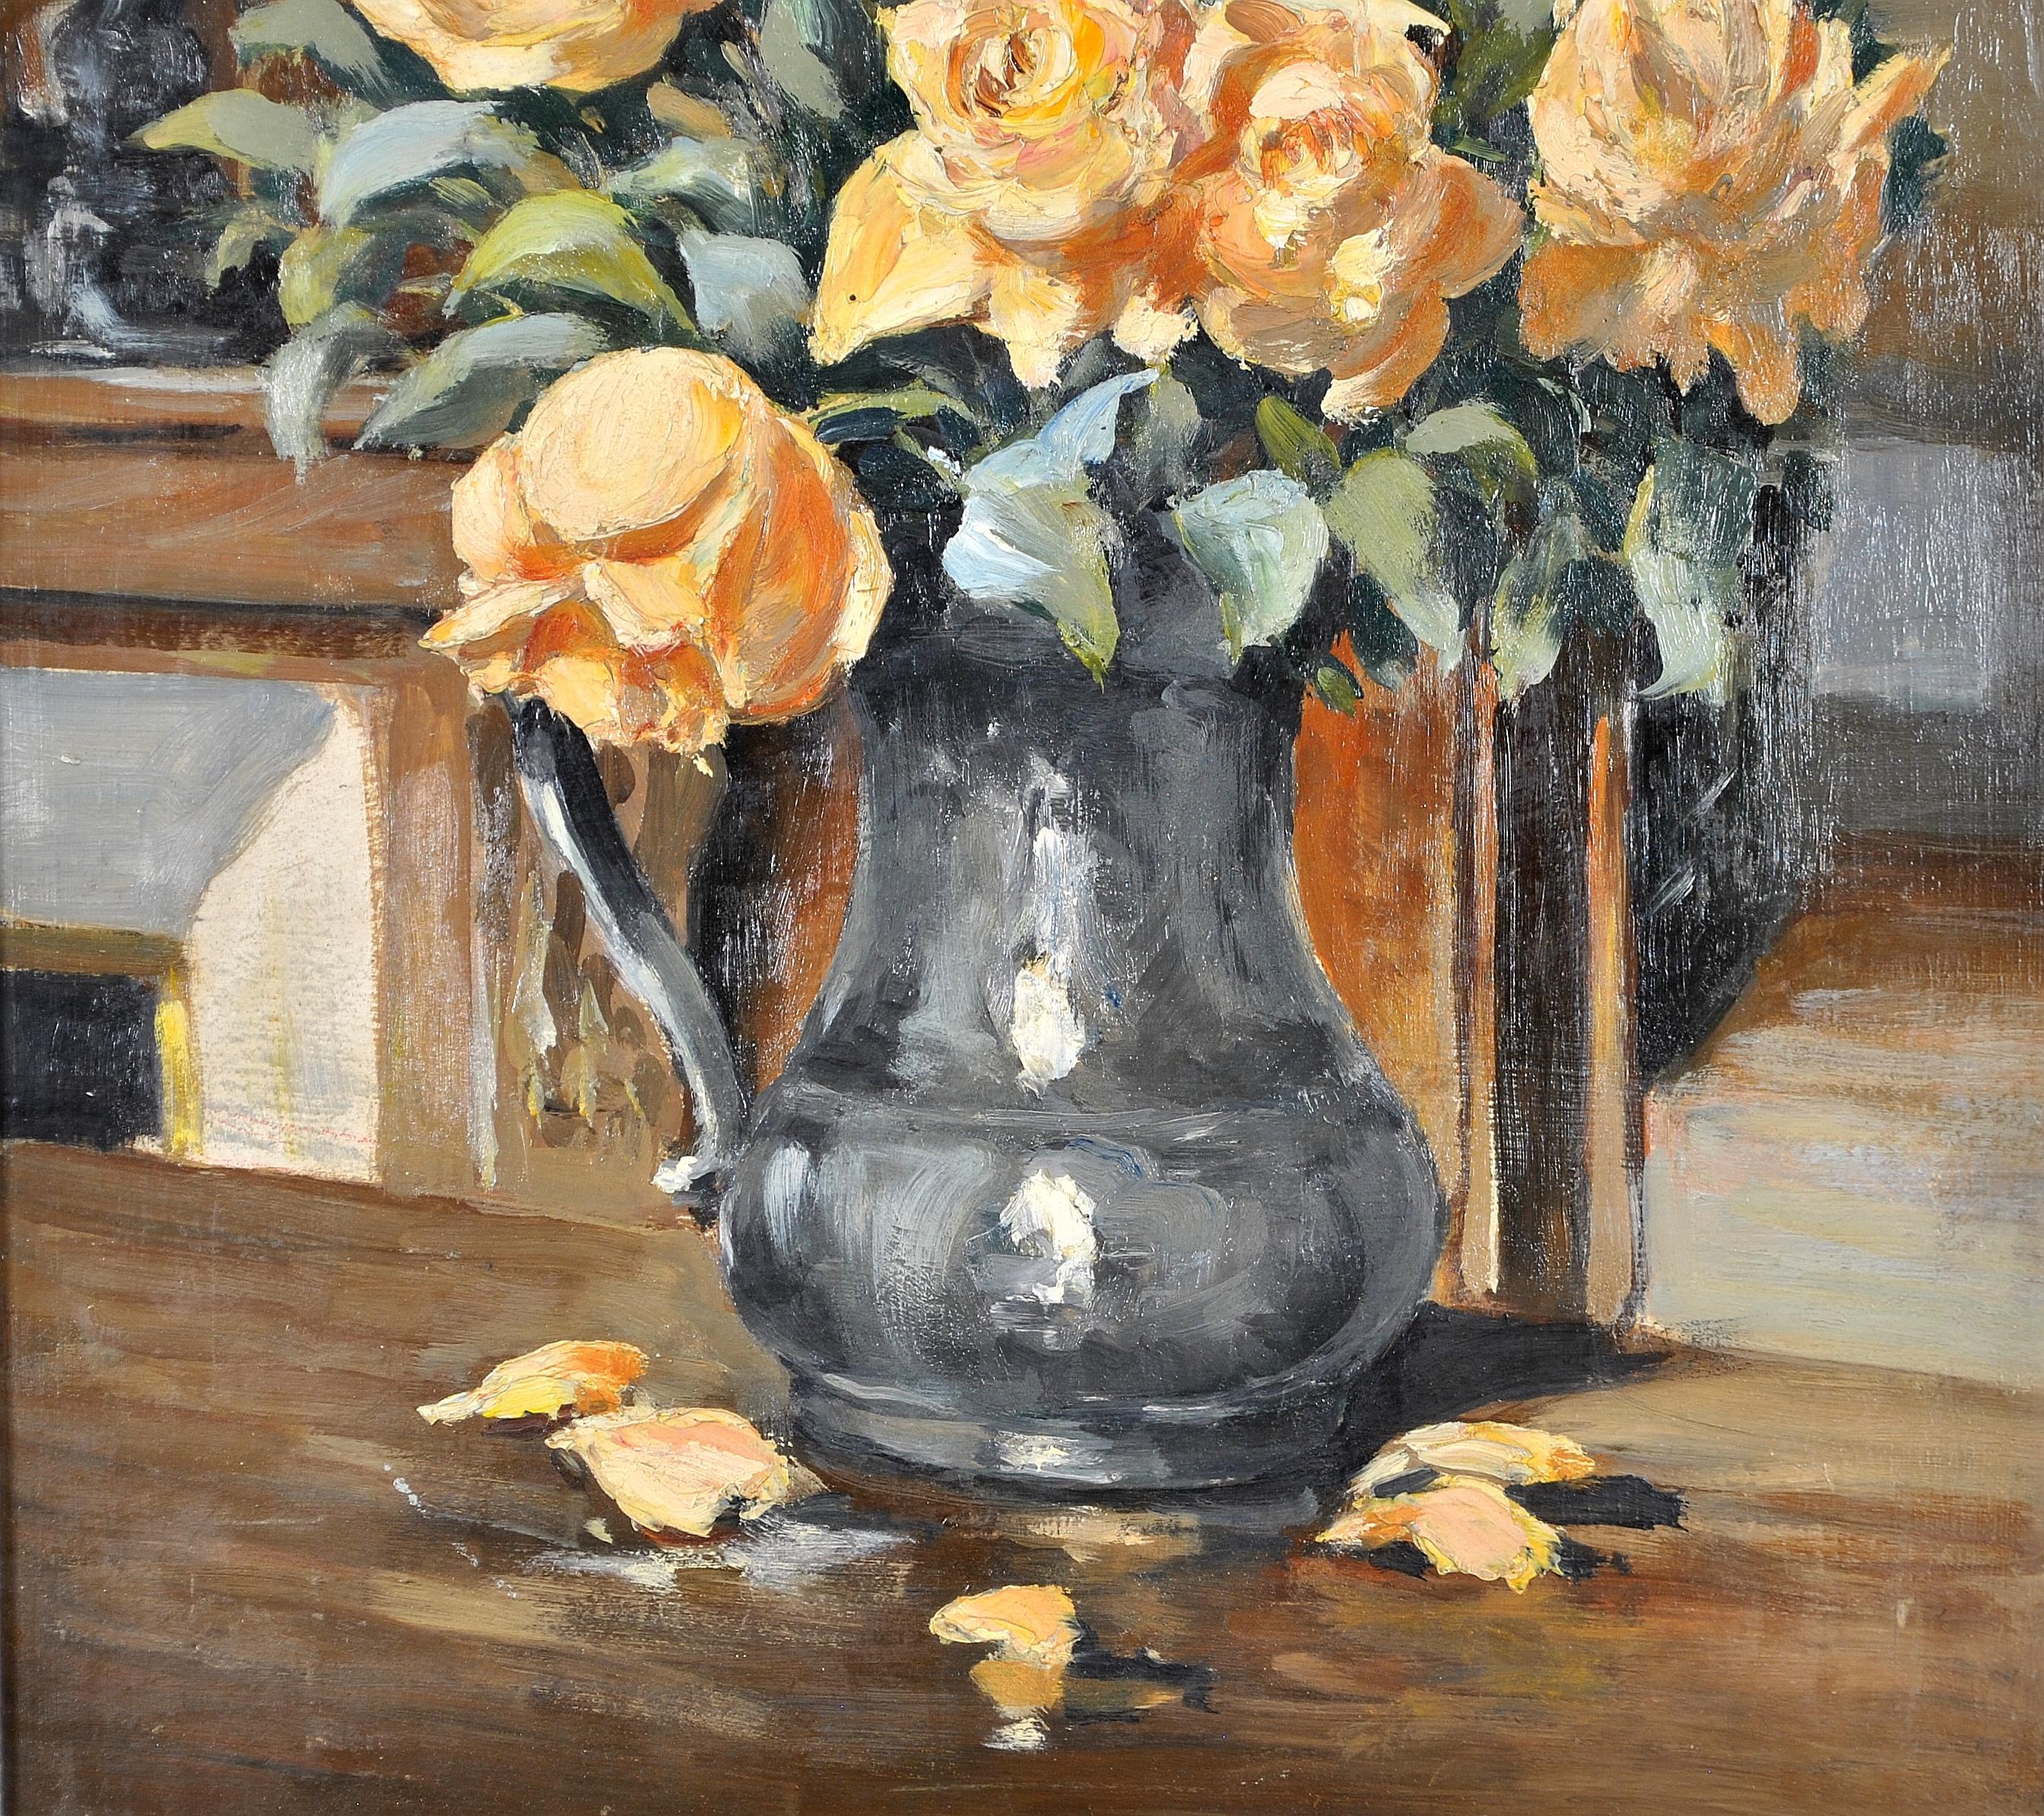 Roses in a Jug - 1920's French Impressionist Antique Still Life Oil Painting - Beige Still-Life Painting by Early 20th Century French School